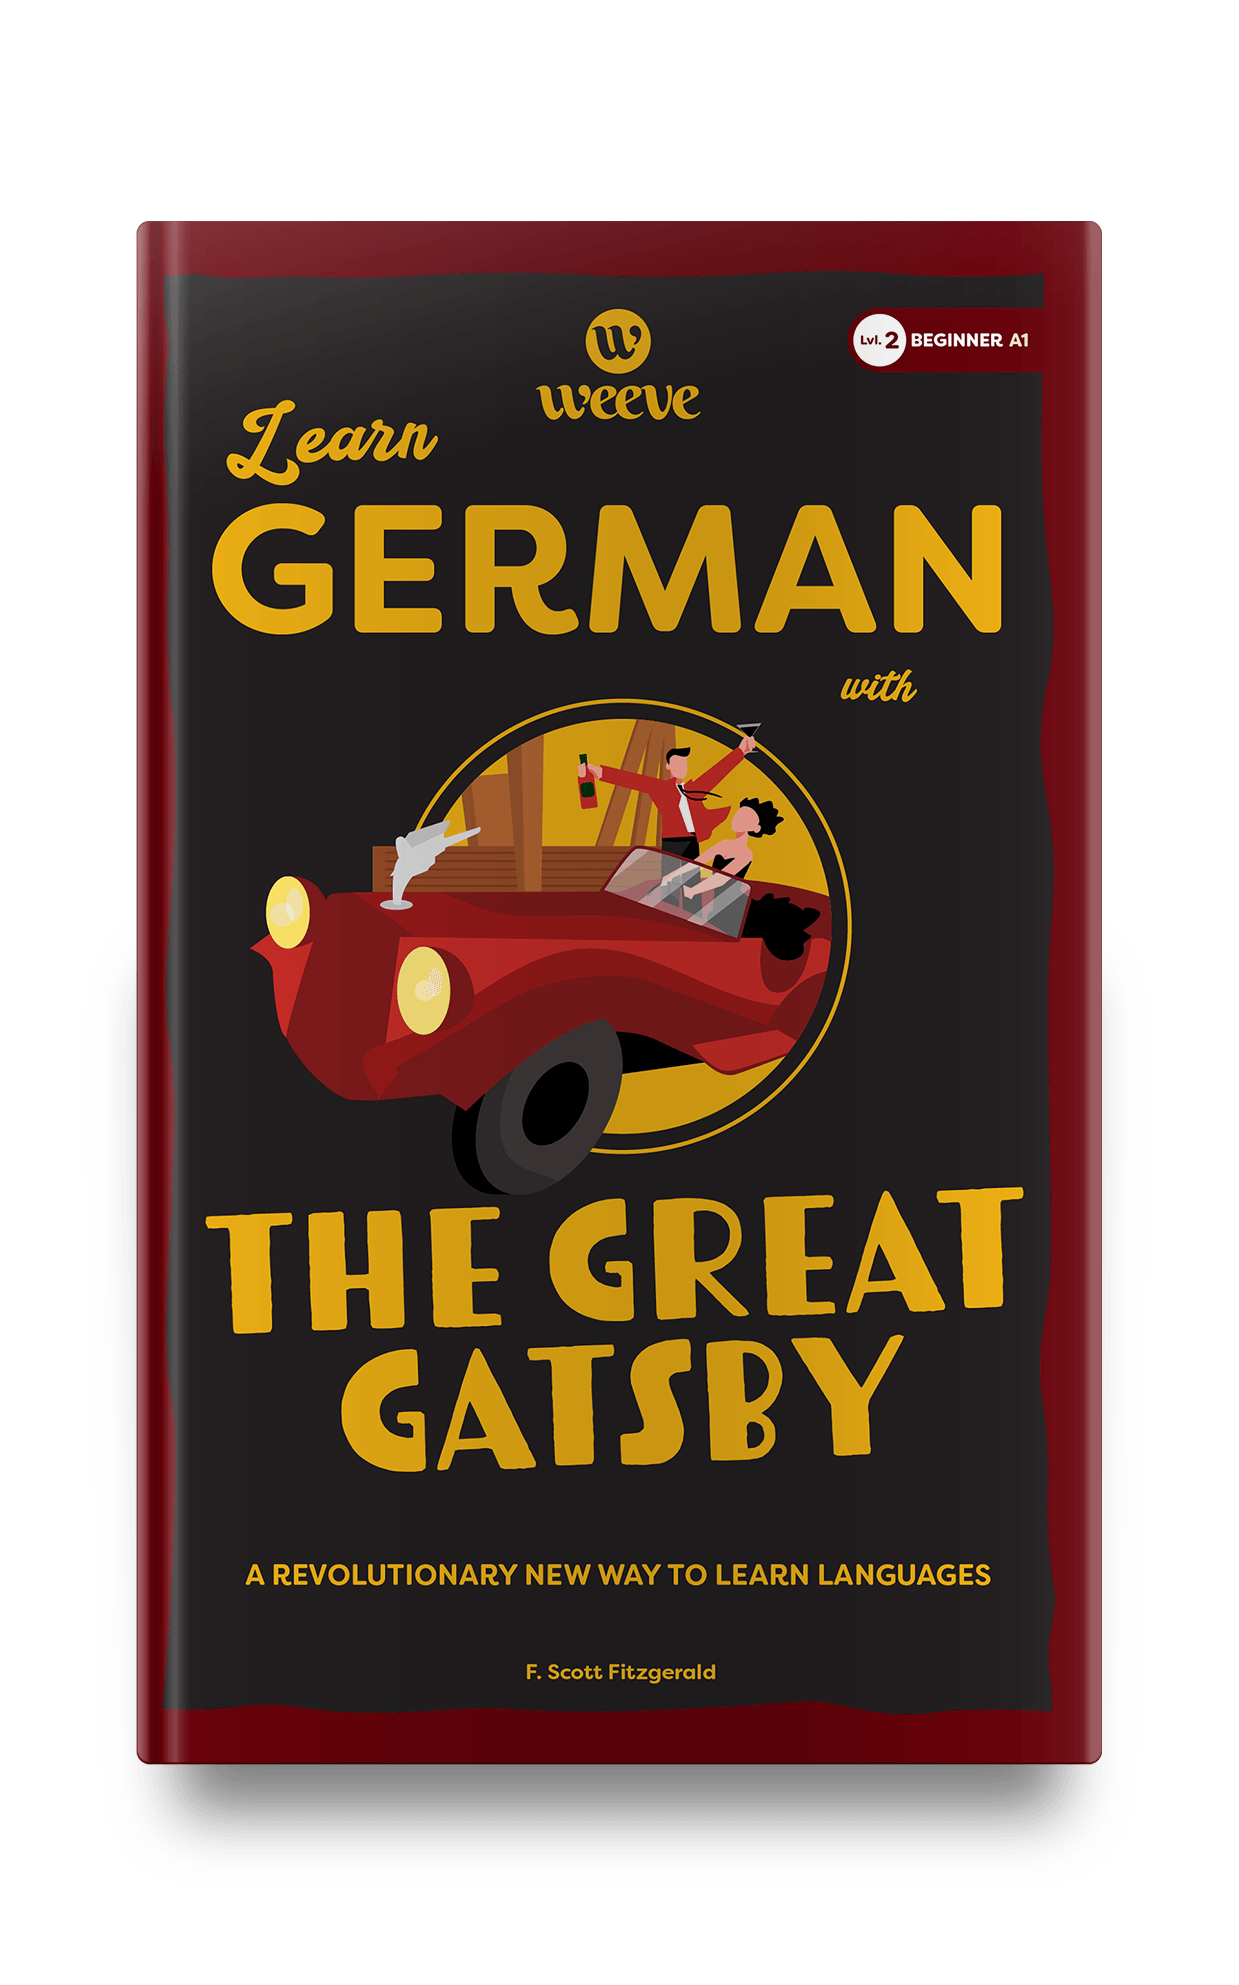 Learn German with The Great Gatsby - Weeve